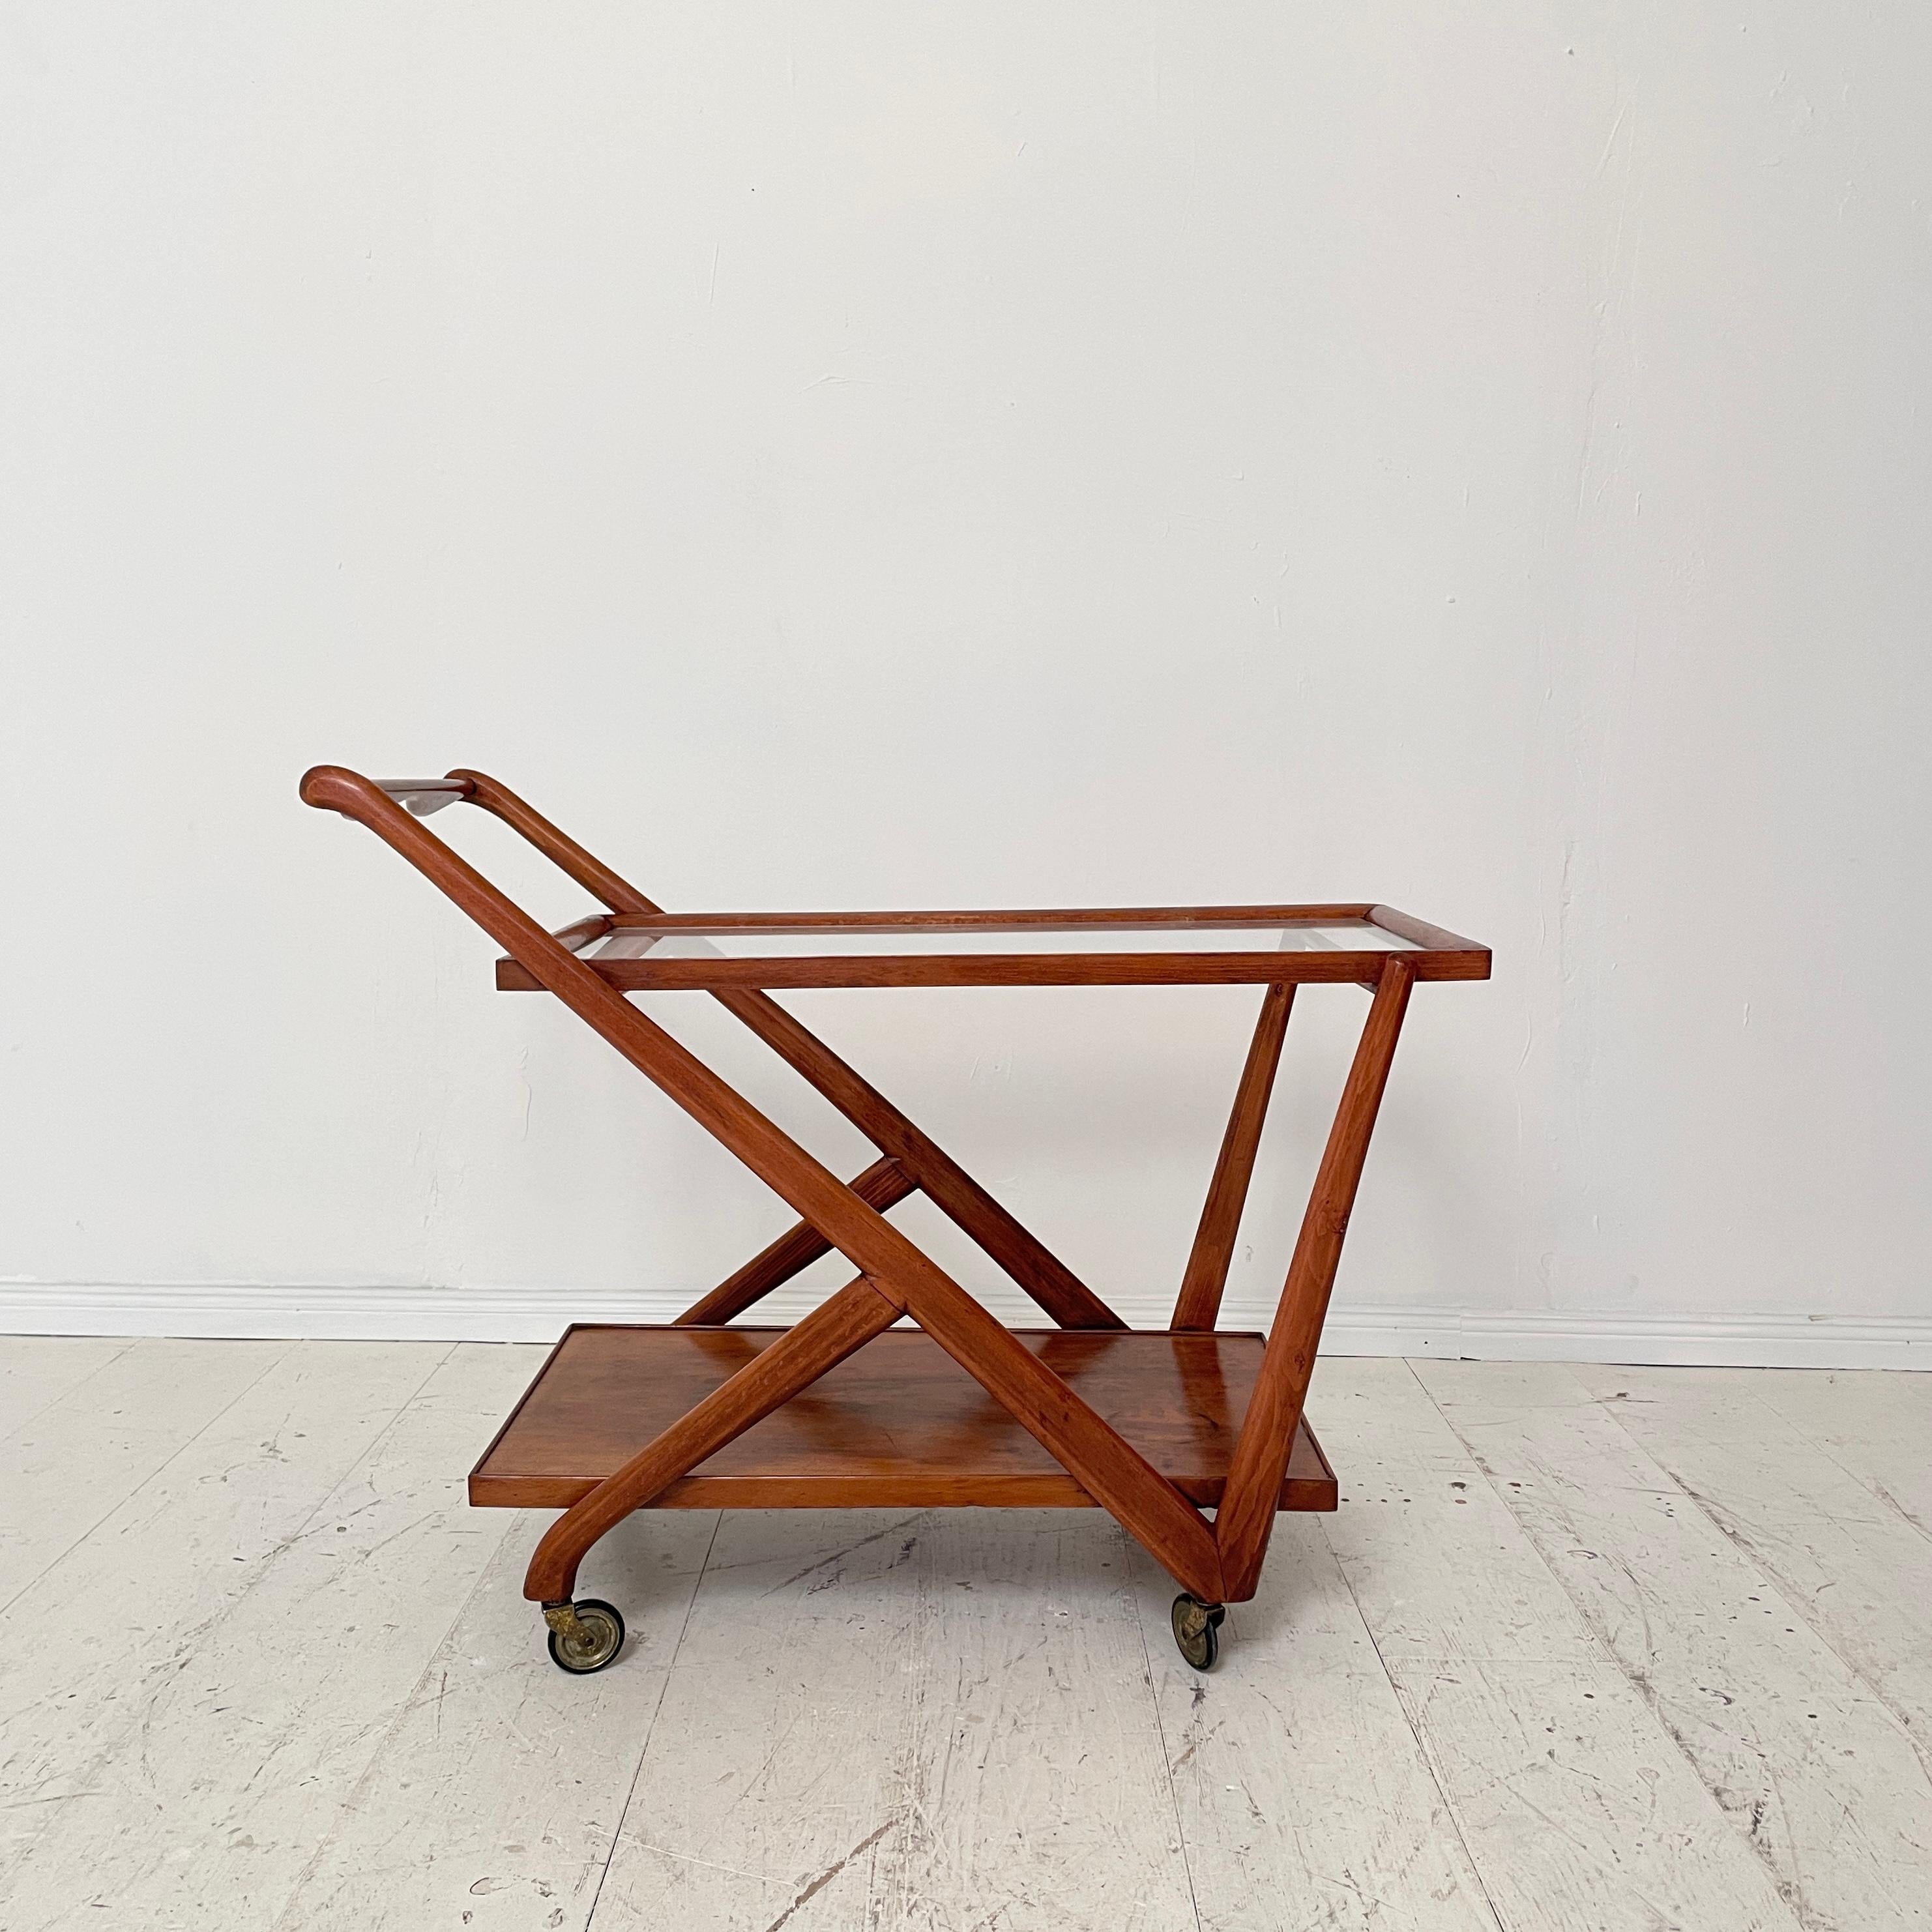 This beautiful mid-century sculptural bar cart by Cesare Lacca in light brown walnut was made in the 1950s.
The cart is in great vintage condition. The two glass plates has been replaced.
A unique piece which is a great eye-catcher for your